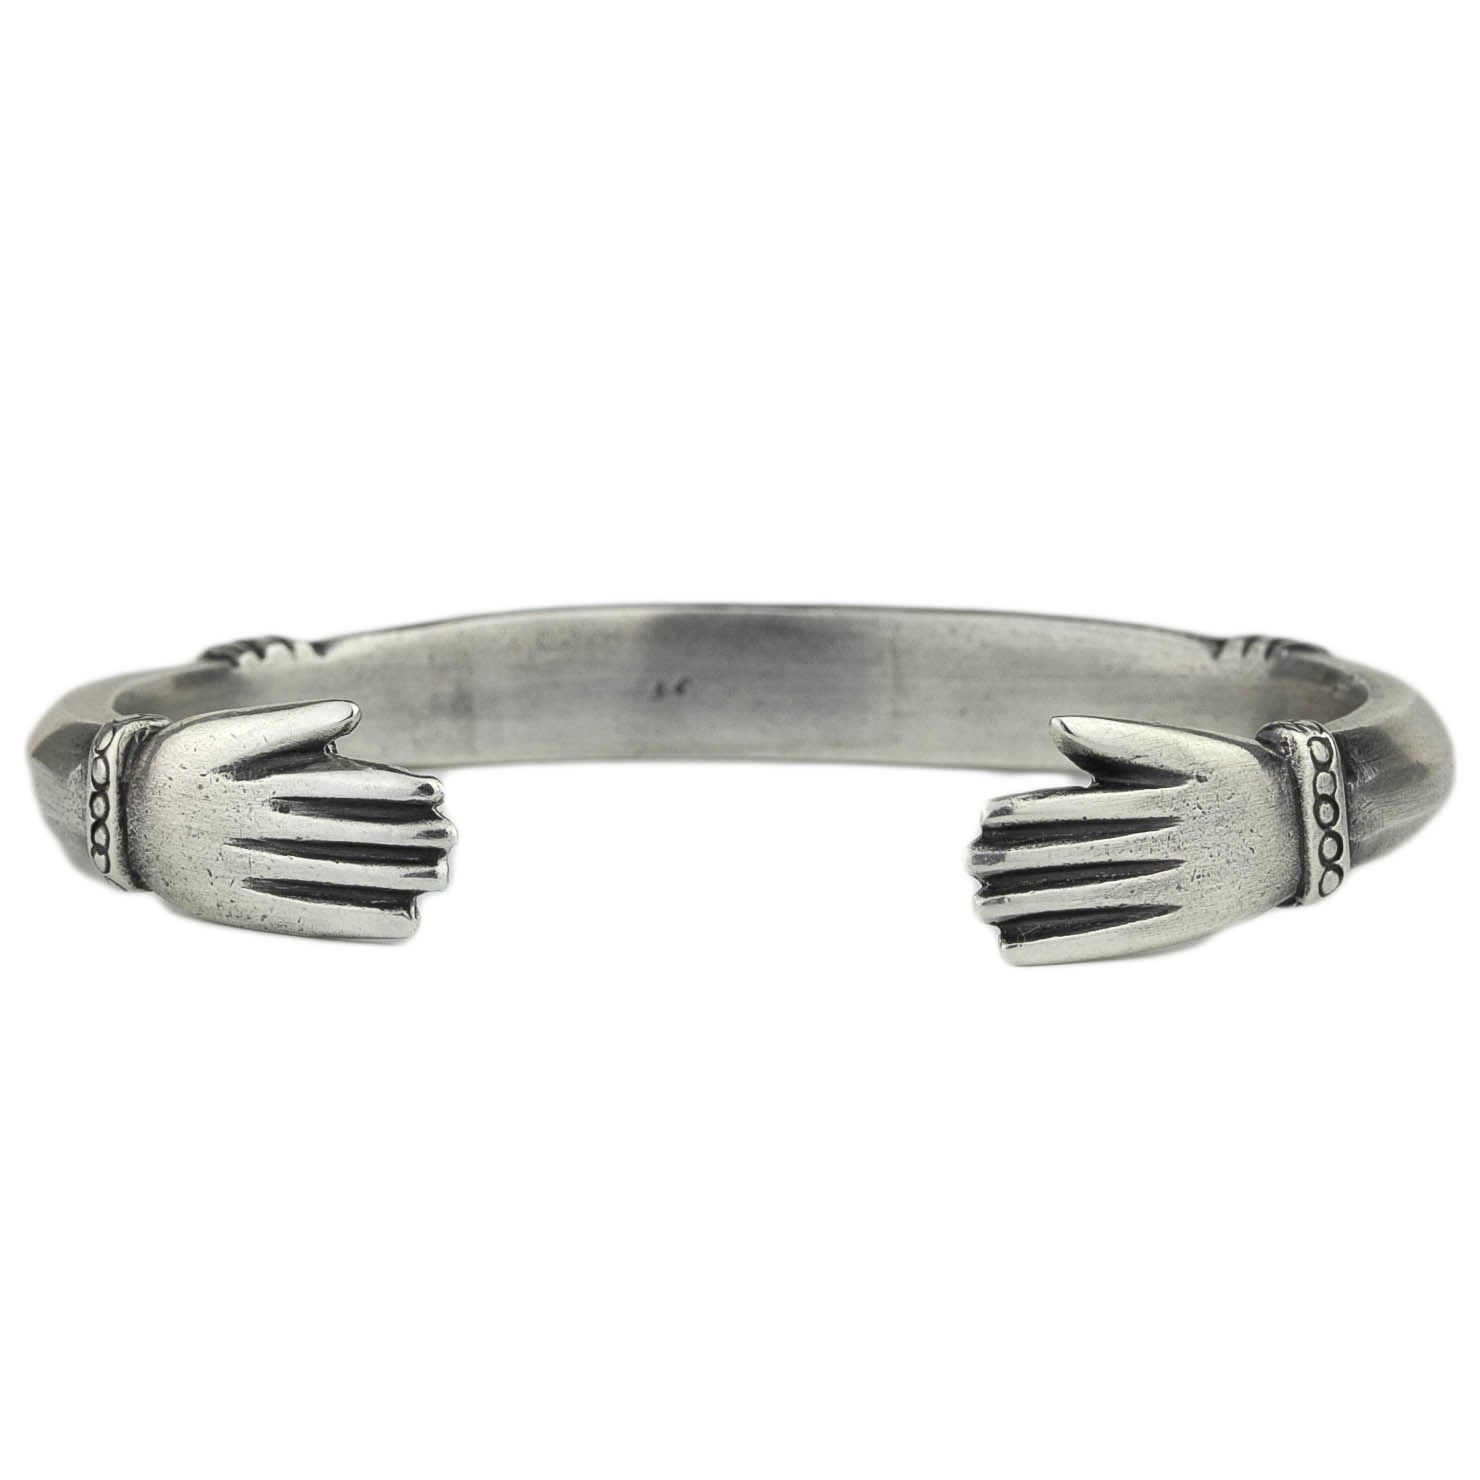 The Mothers Hands Cuff Bracelet